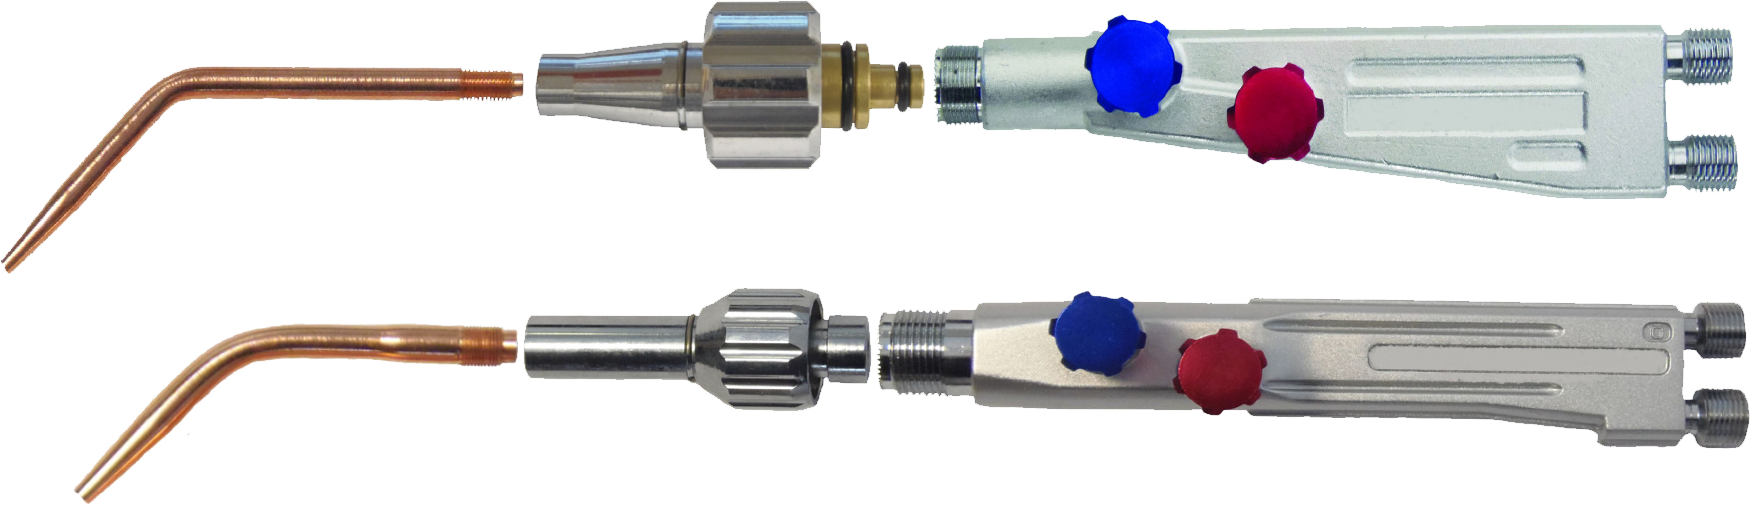 LightWeight & Type 5 shanks with mixers and welding nozzles